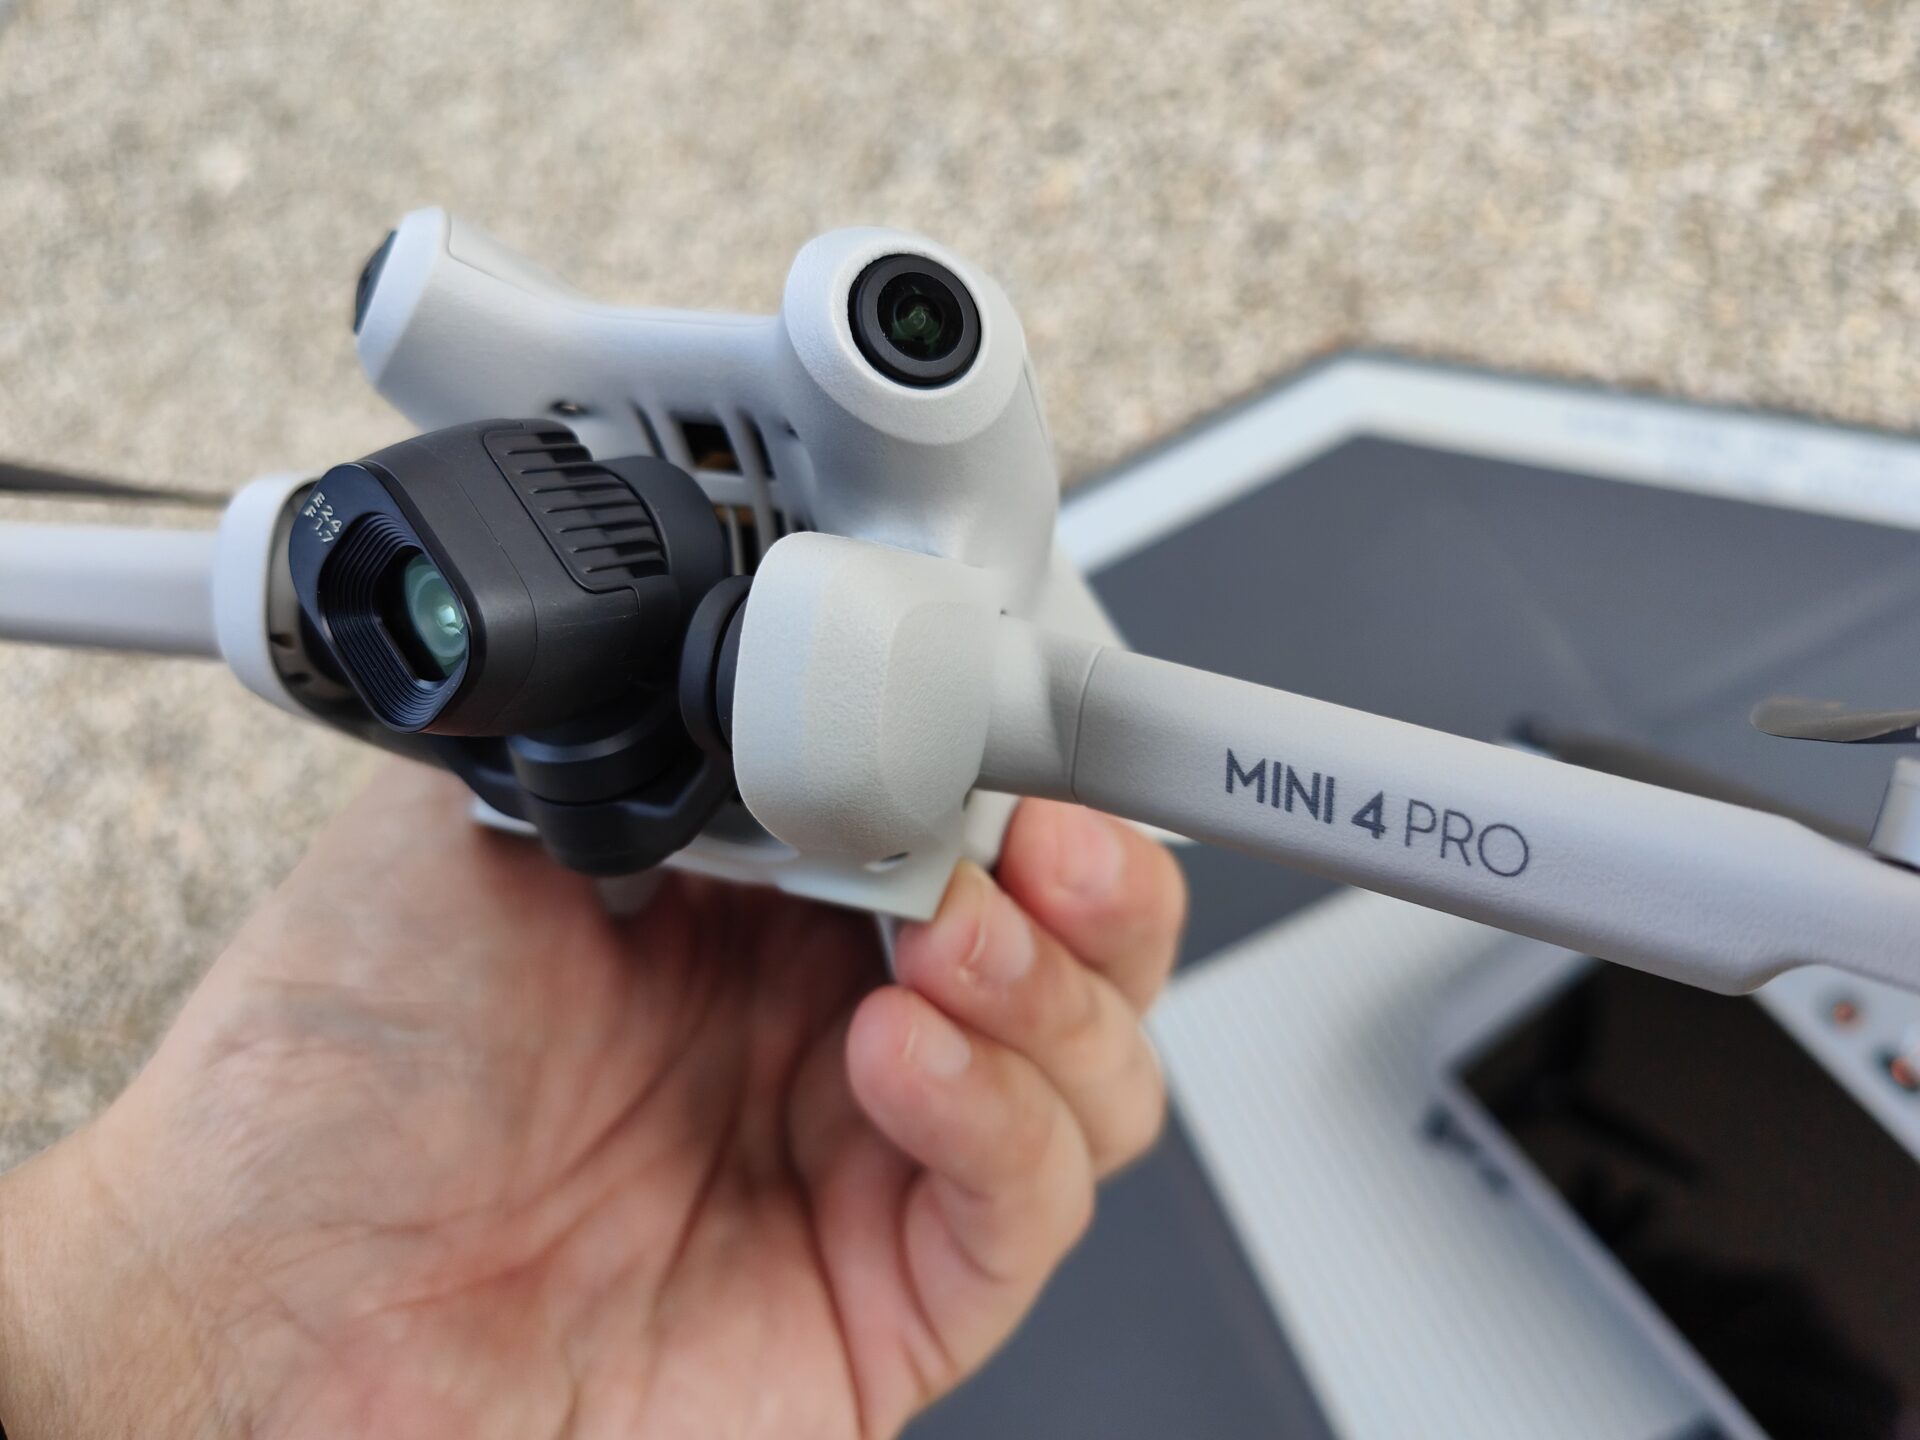 Hands on: DJI Mini 4 Pro makes it easy for users to fly - Techgoondu